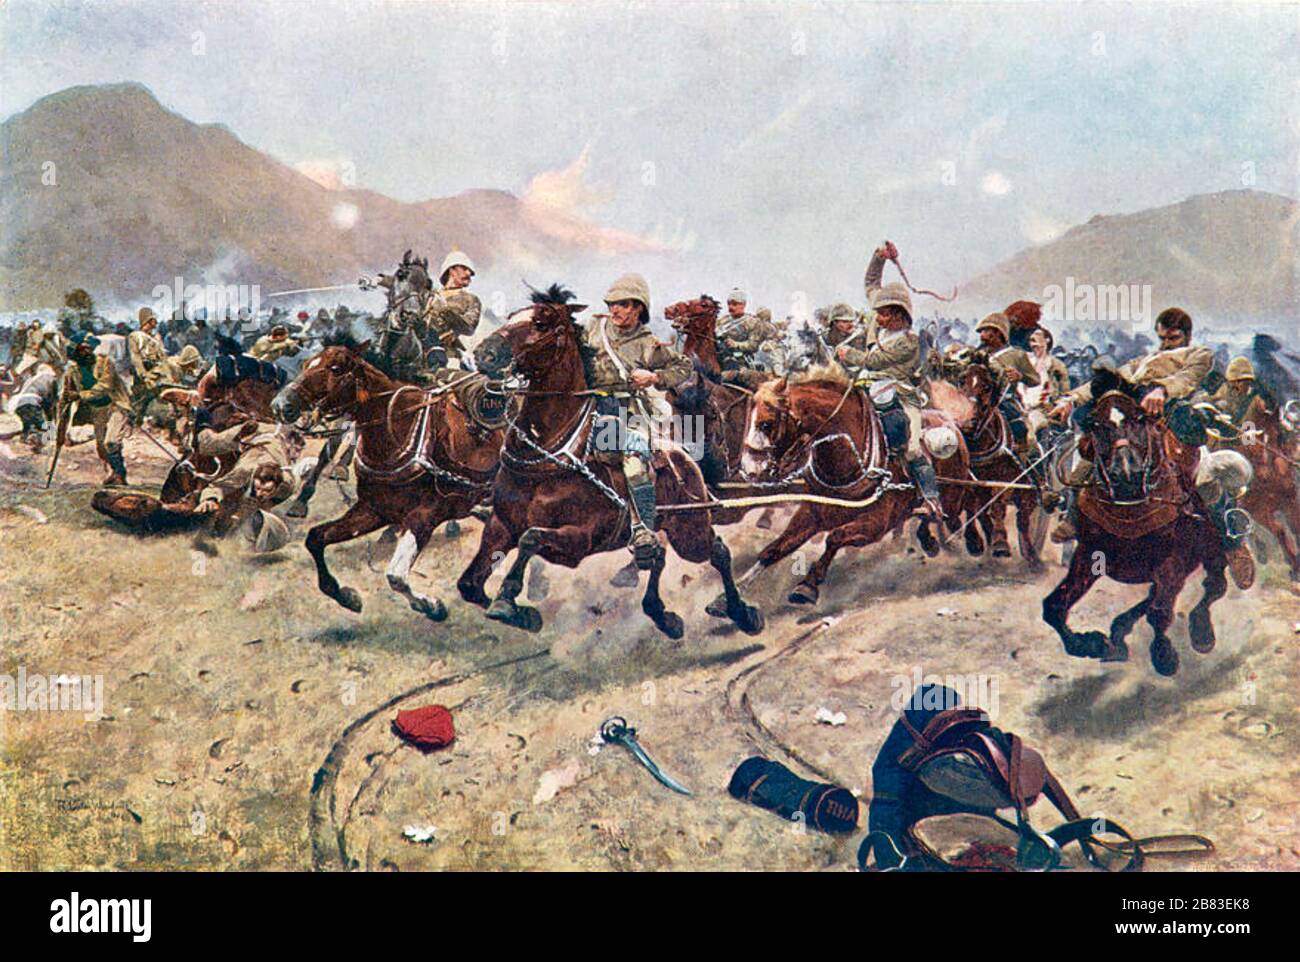 BATTLE OF MAIWAND, Afghanistan,  27 July 1880. Richard Woodville's 1883 painting 'Maiwand: Saving the Guns' showing the Royal Horse Artillery withdrawing from an Afghan attack Stock Photo